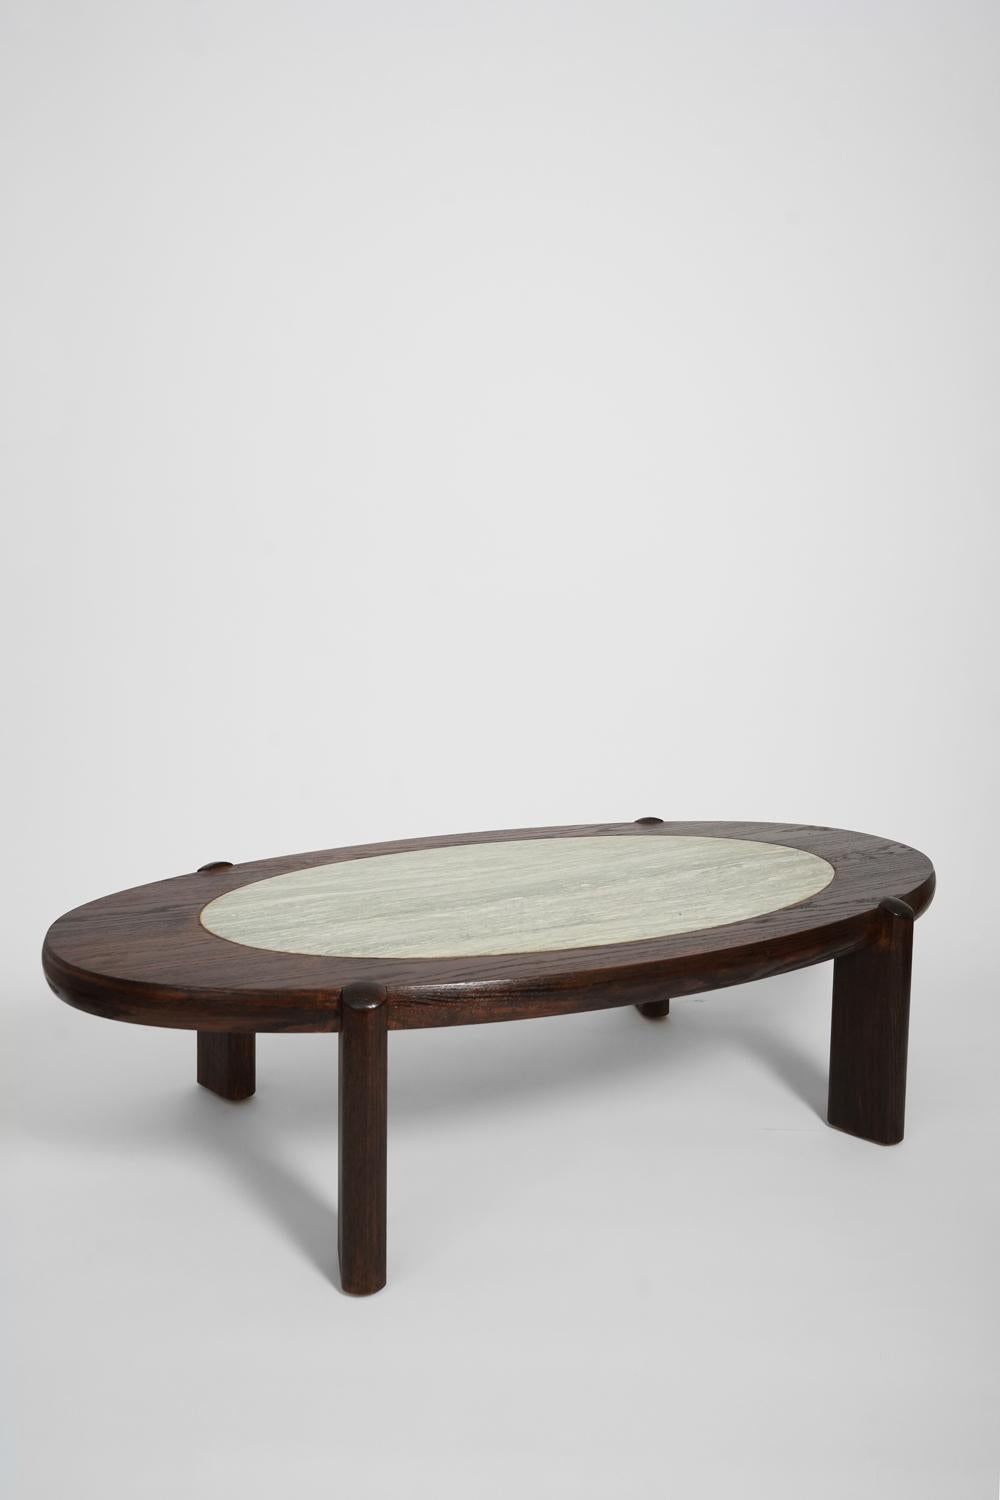 Large oval oak coffee table resting on four legs supporting a blue veined granite slab in the center. France, 1960s.